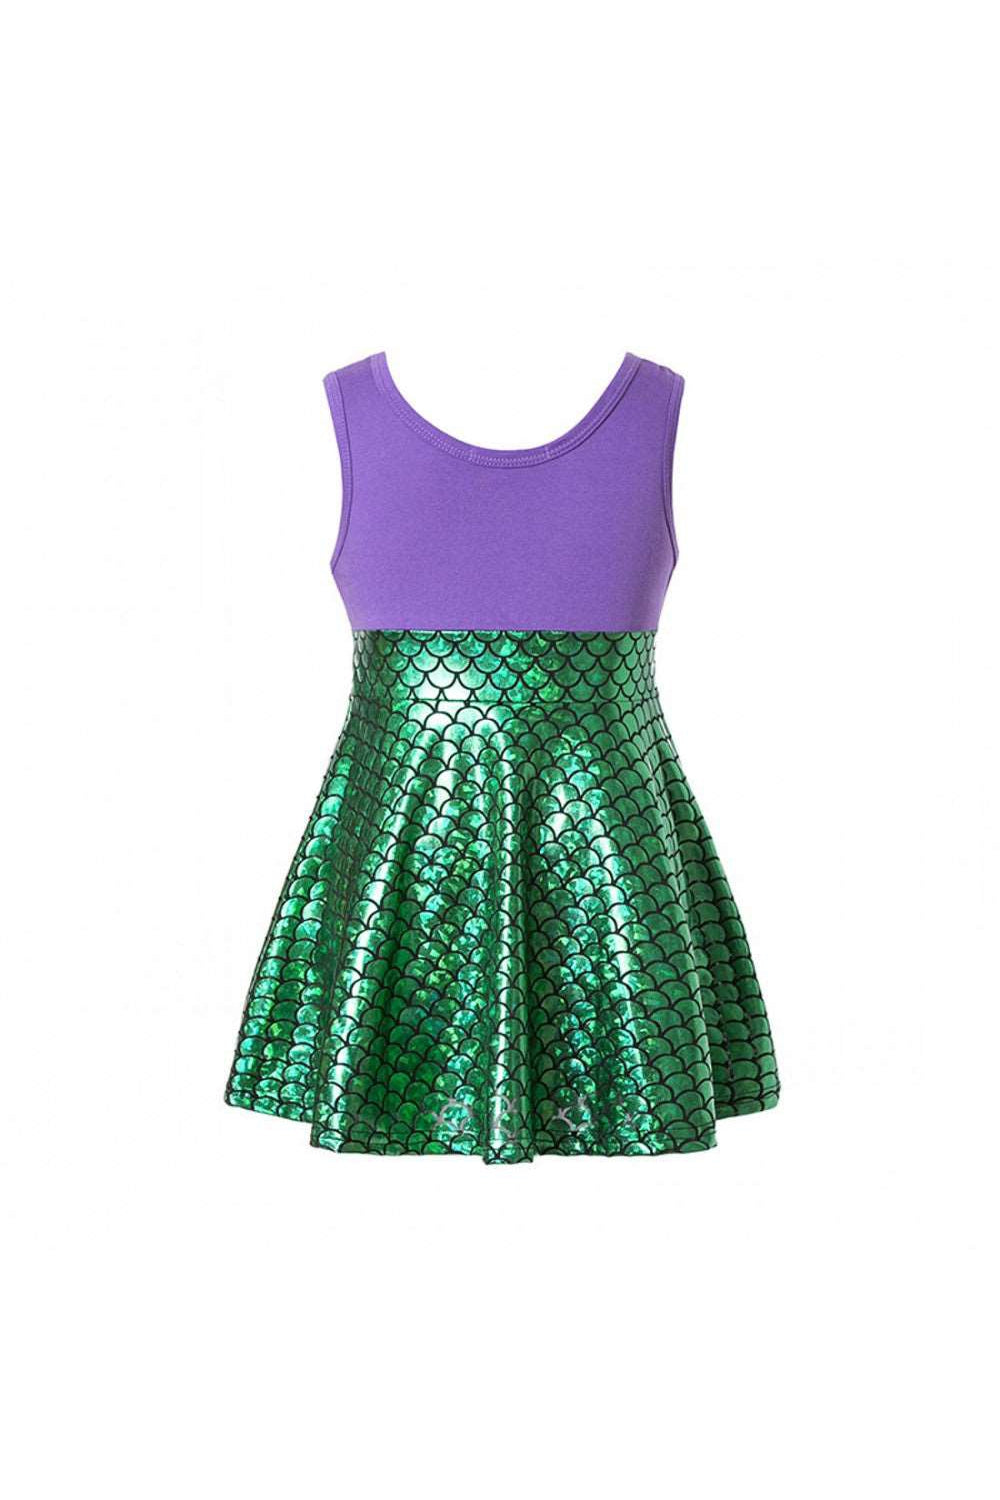 Princess inspired Fancy dresses - The Ariel